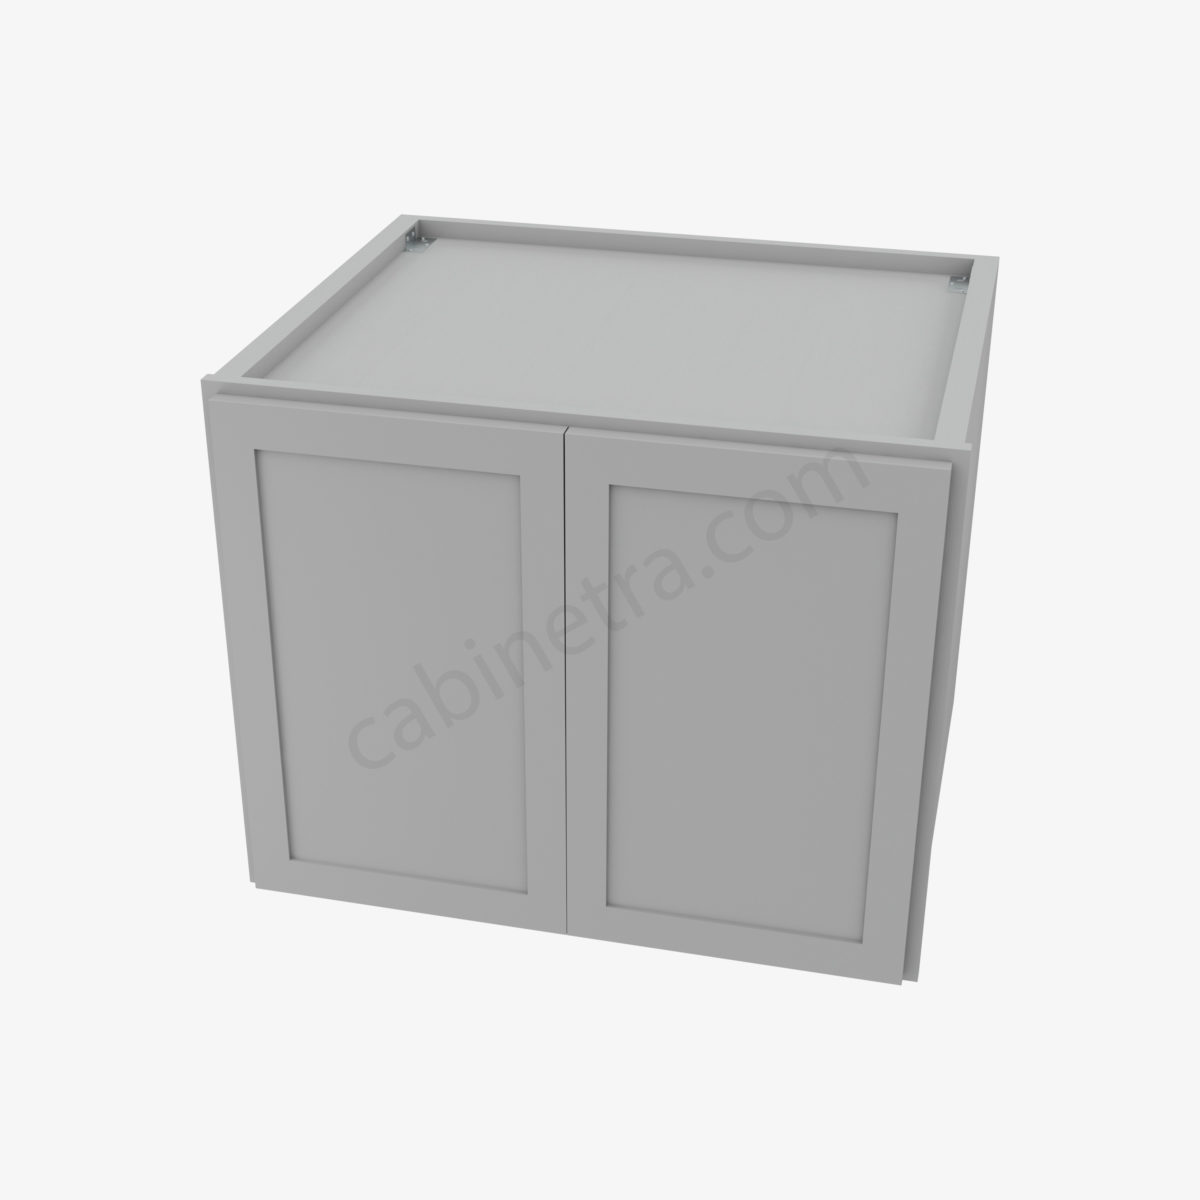 AB W302424B 3 Forevermark Lait Gray Shaker Cabinetra scaled